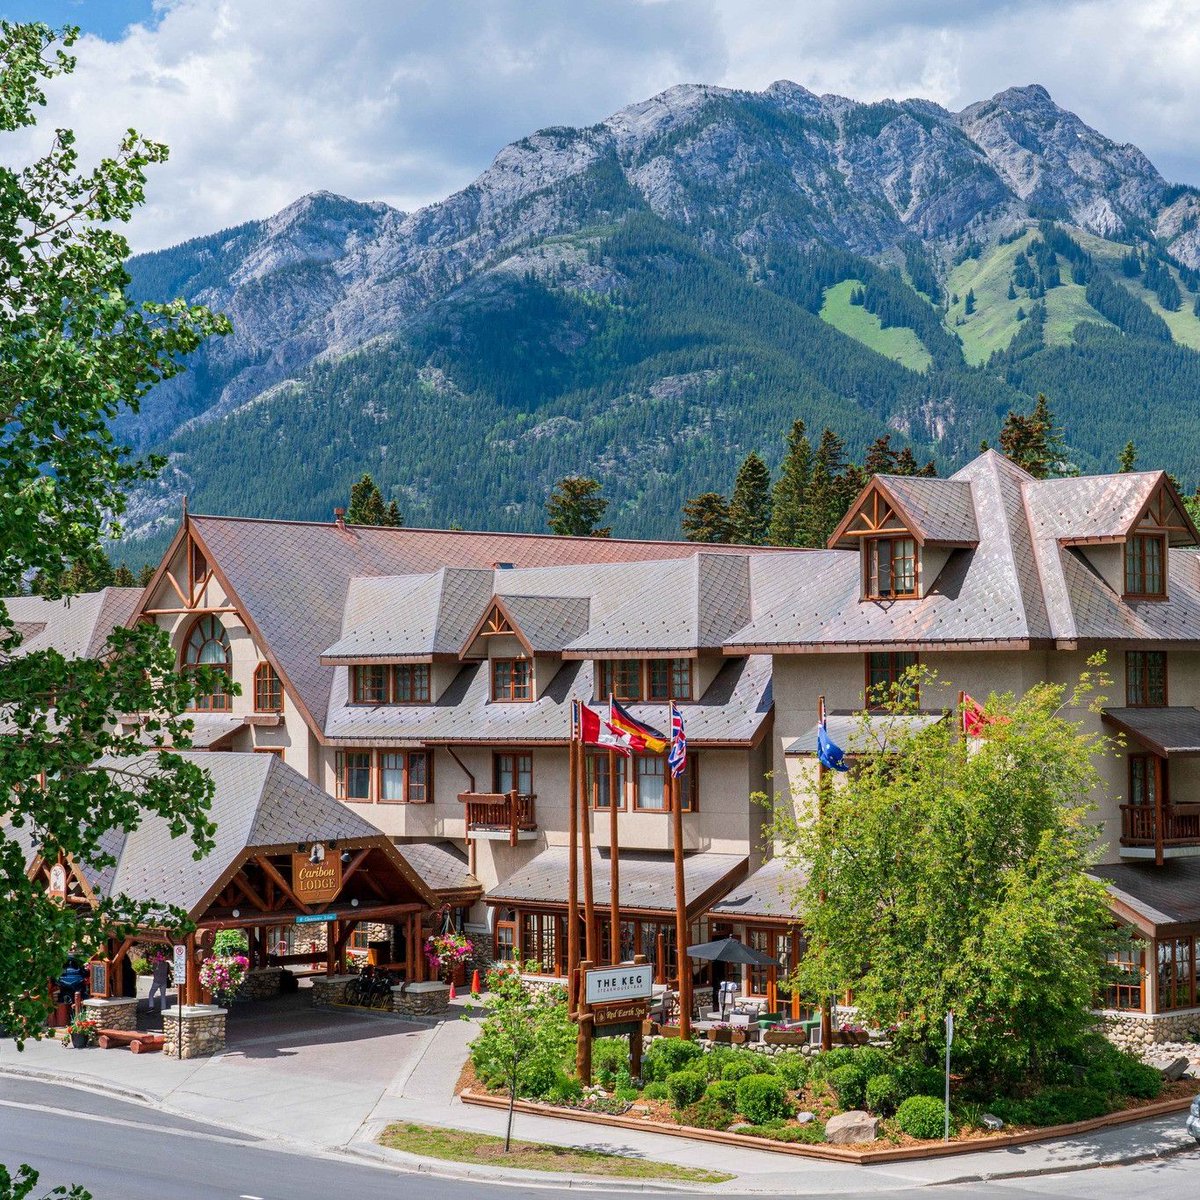 Take on the Canadian Rockies from your GayTravel Approved suite at Banff Caribou Lodge & Spa. With its ideal location, you'll be in close proximity to all things LGBTQ+ friendly including the renowned Banff Avenue: gaytravel.com/gay-friendly-h… #gaytravel